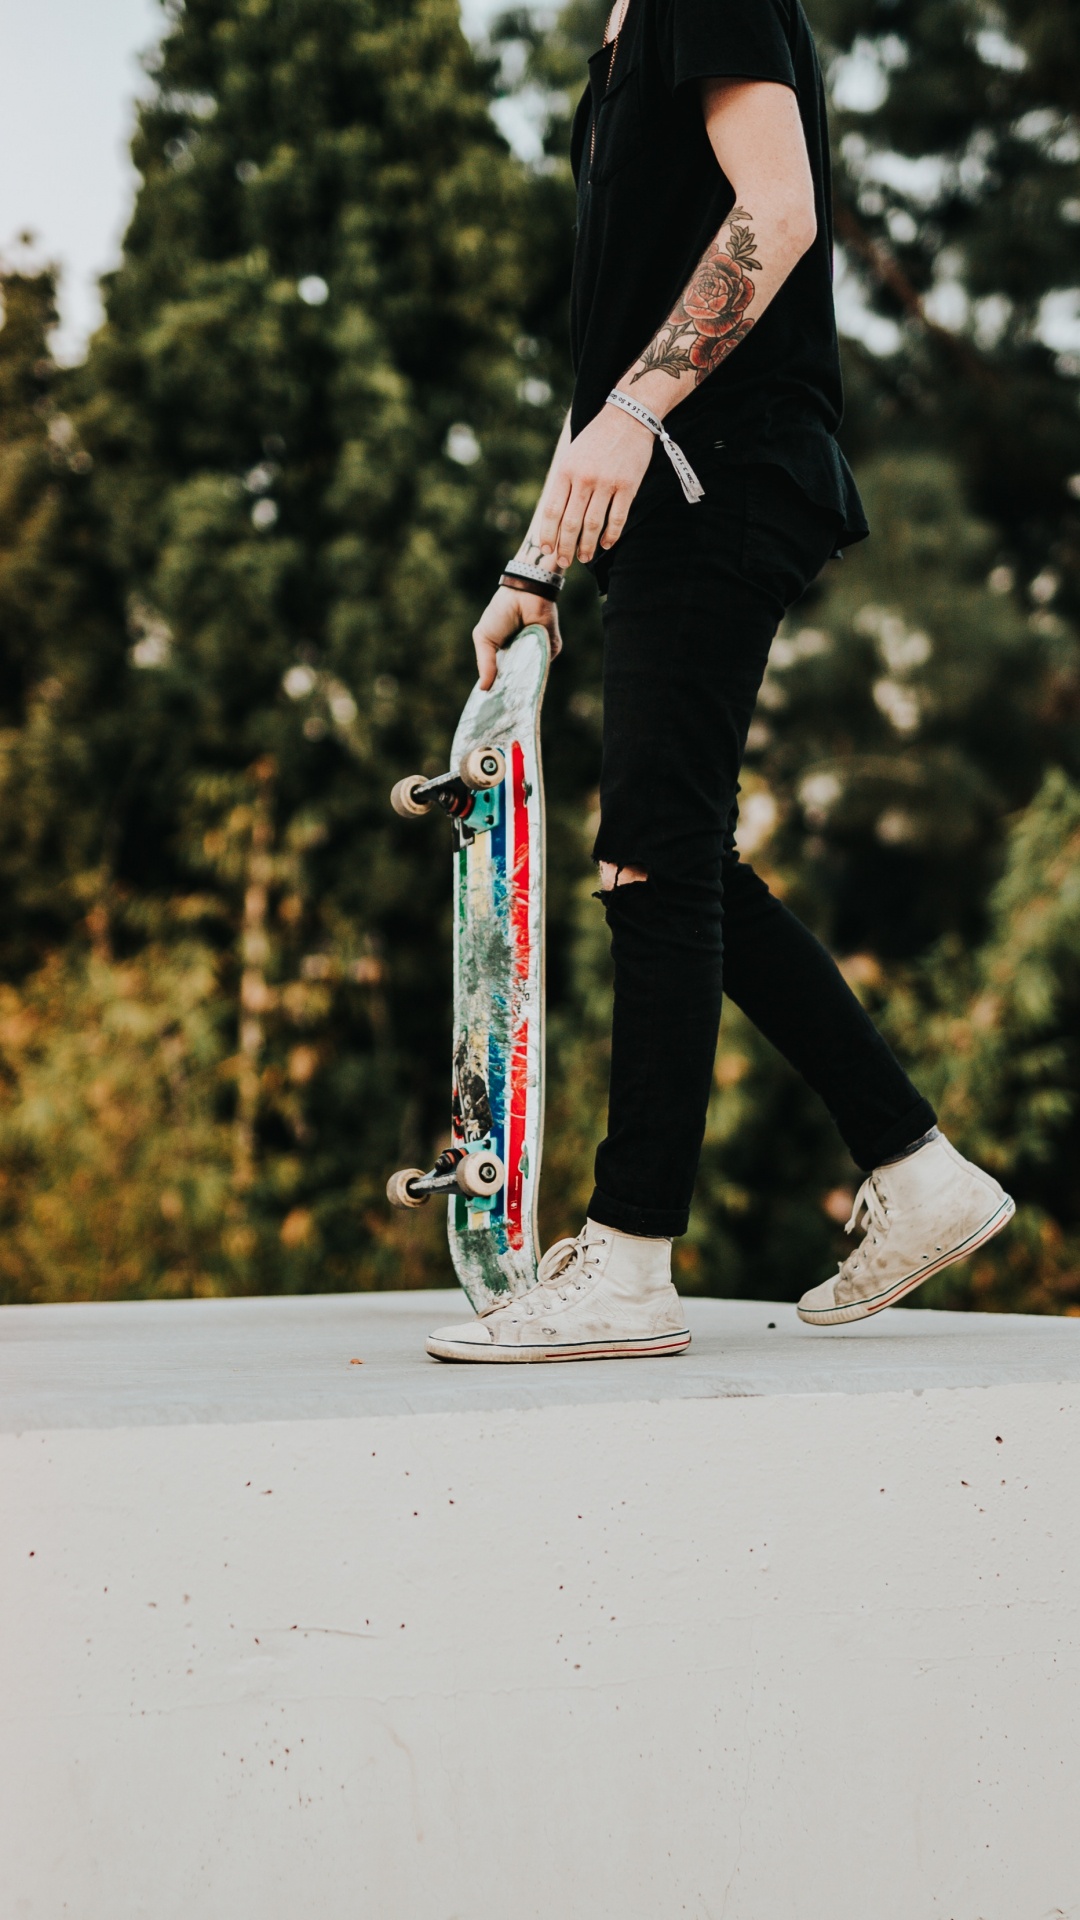 Man in Black Pants and Black Jacket Riding Skateboard. Wallpaper in 1080x1920 Resolution